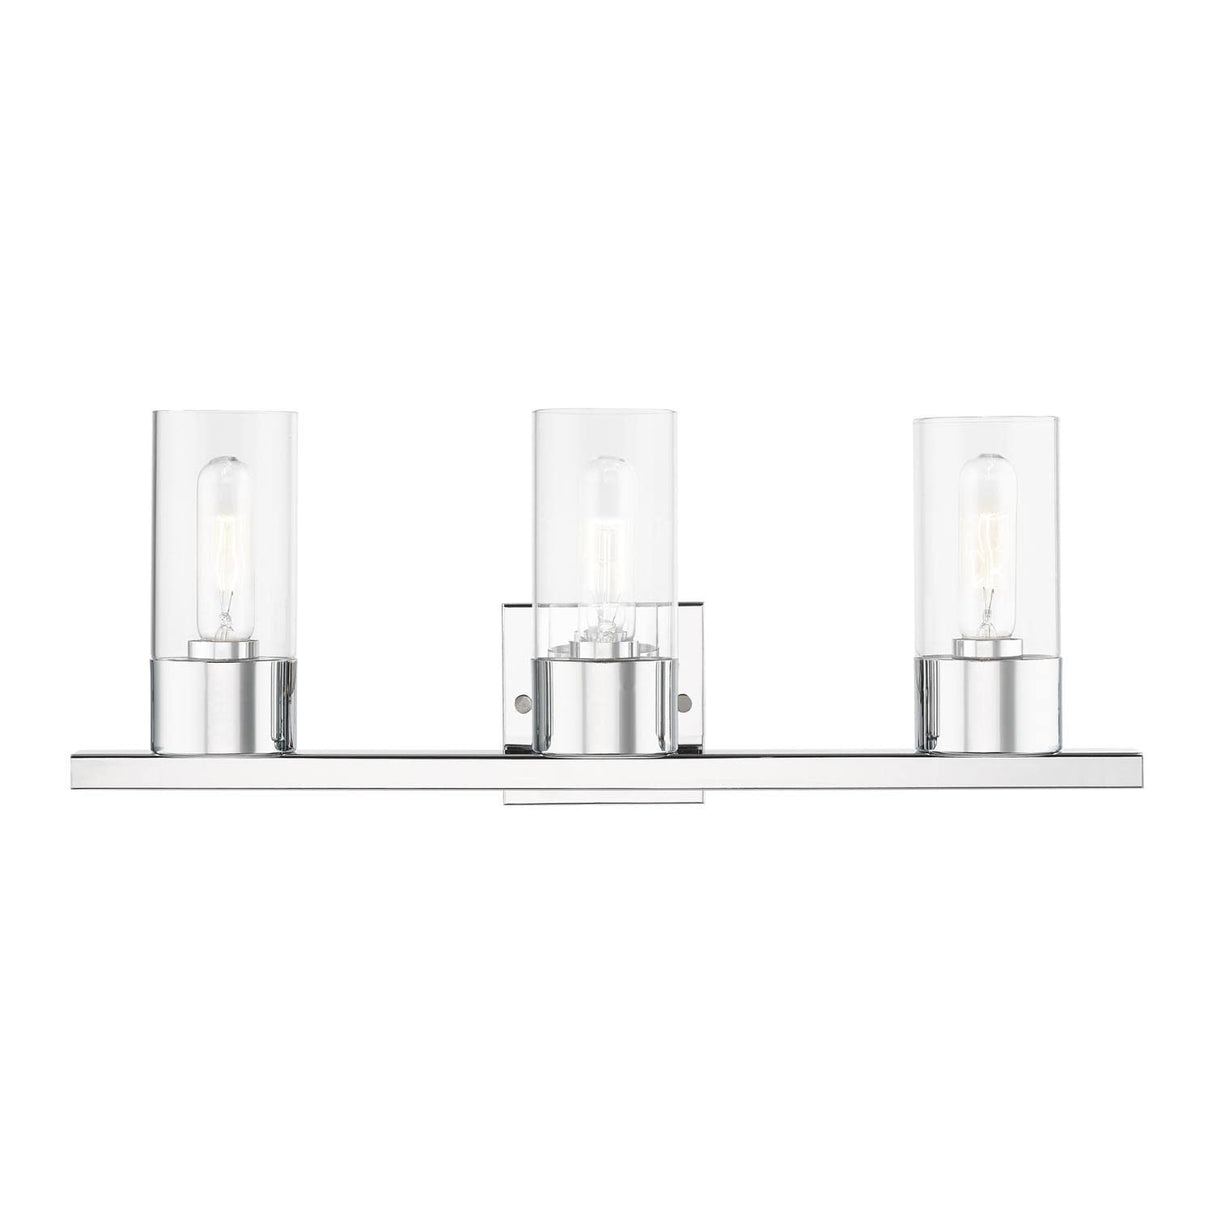 Carson 3 Light Vanity in Polished Chrome (17313-05)